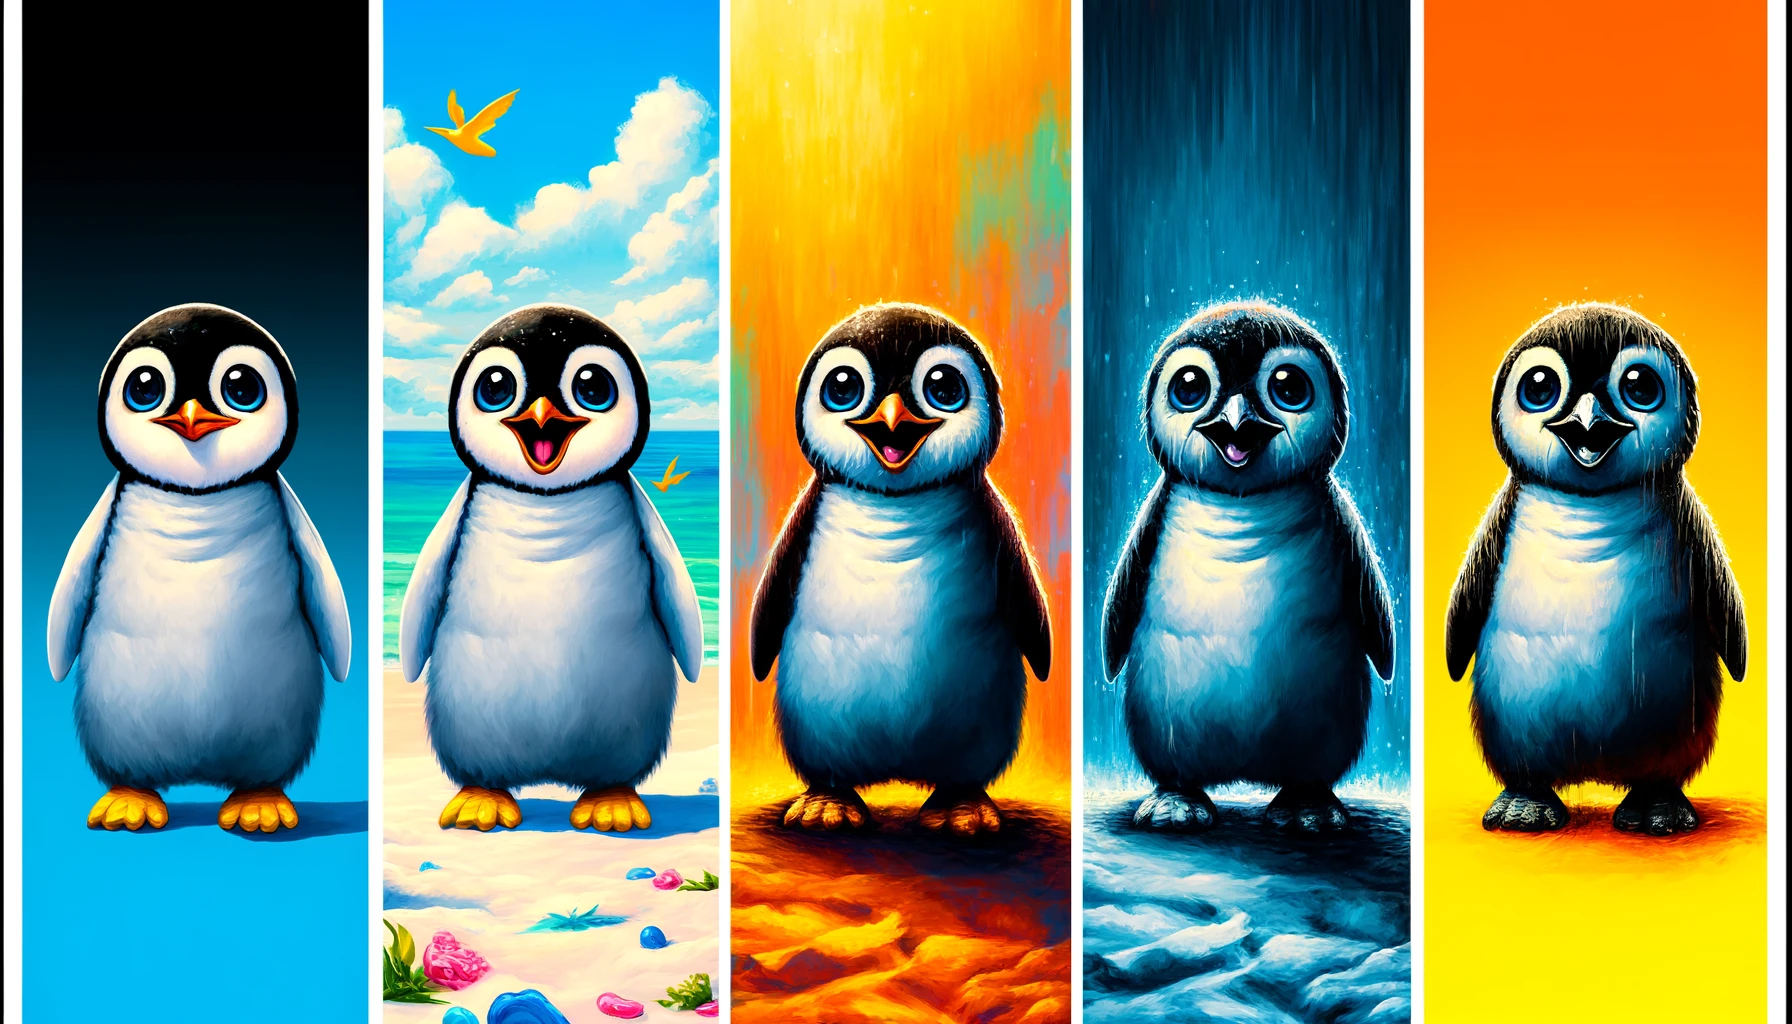 five penguins, ranging emotion from troubled to joyous